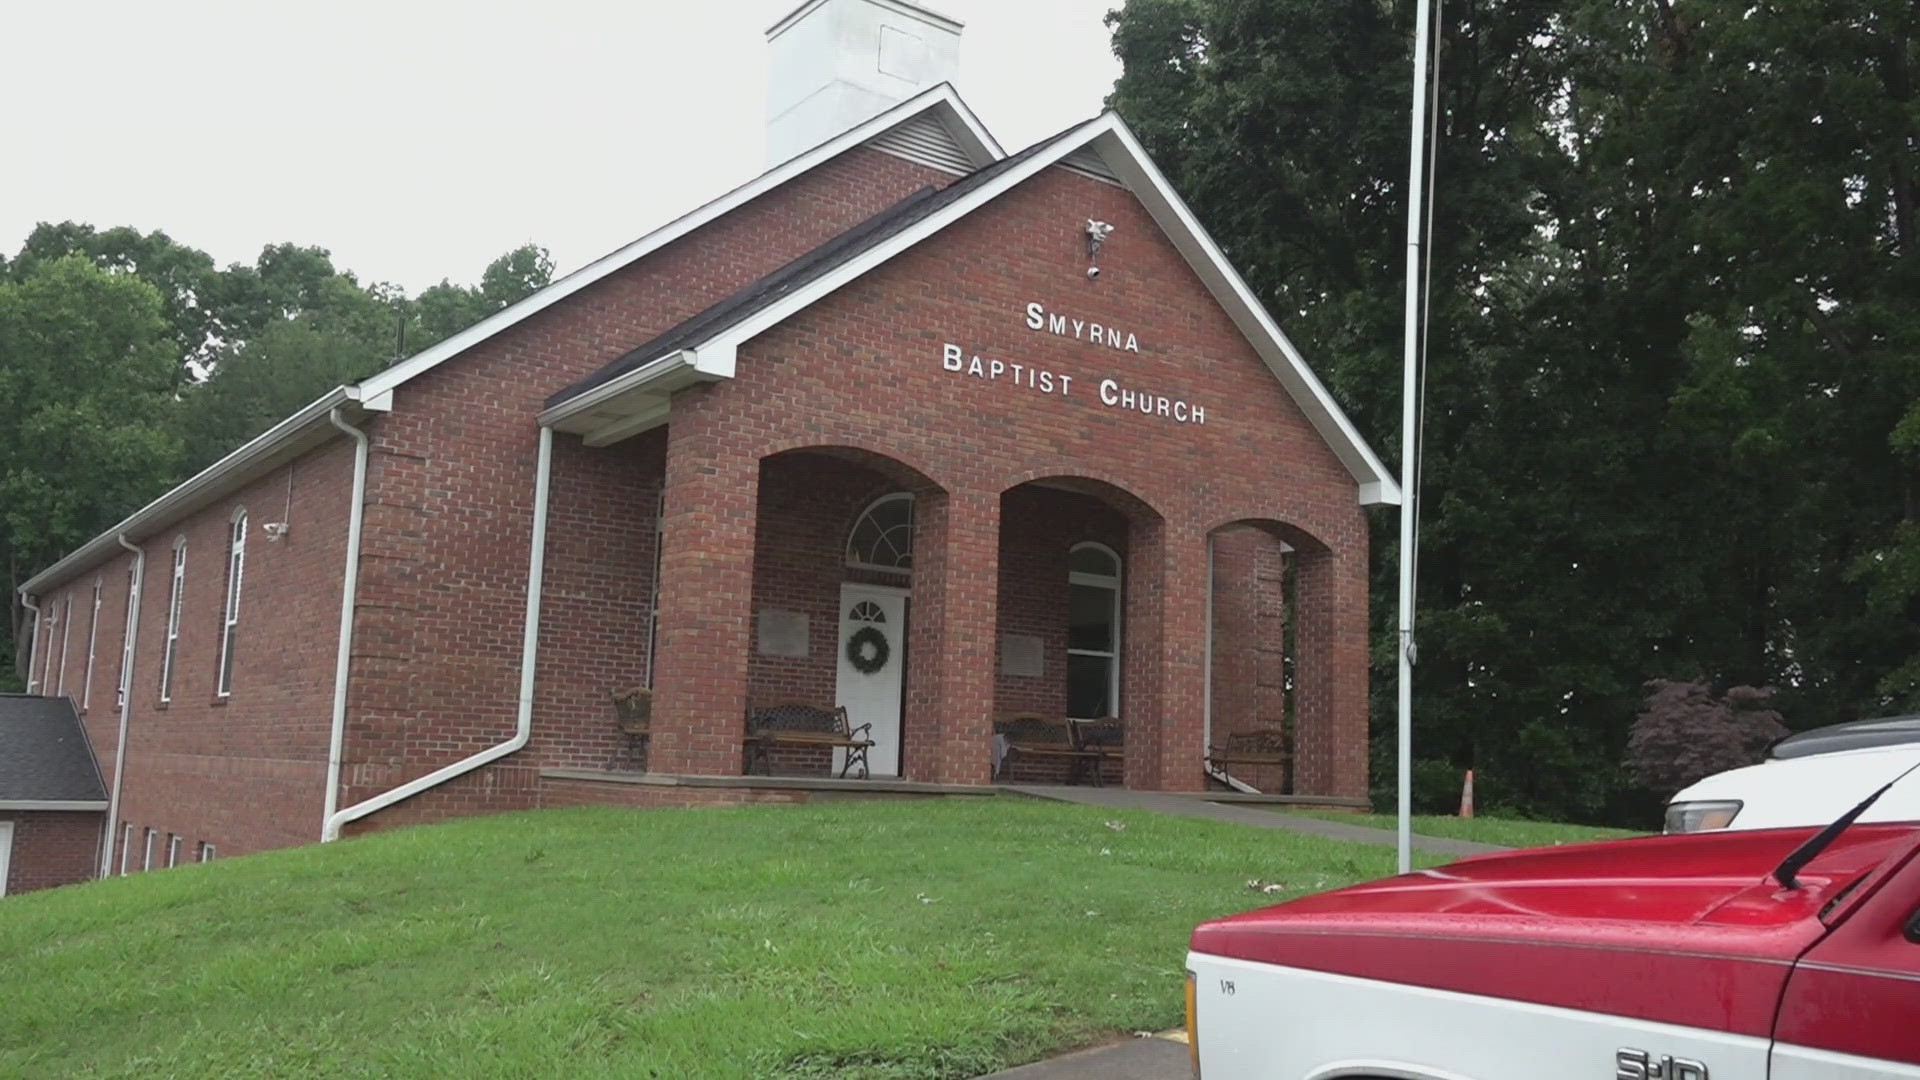 Blount County Sheriff's Office charged two teens with burglary and vandalism of the church.